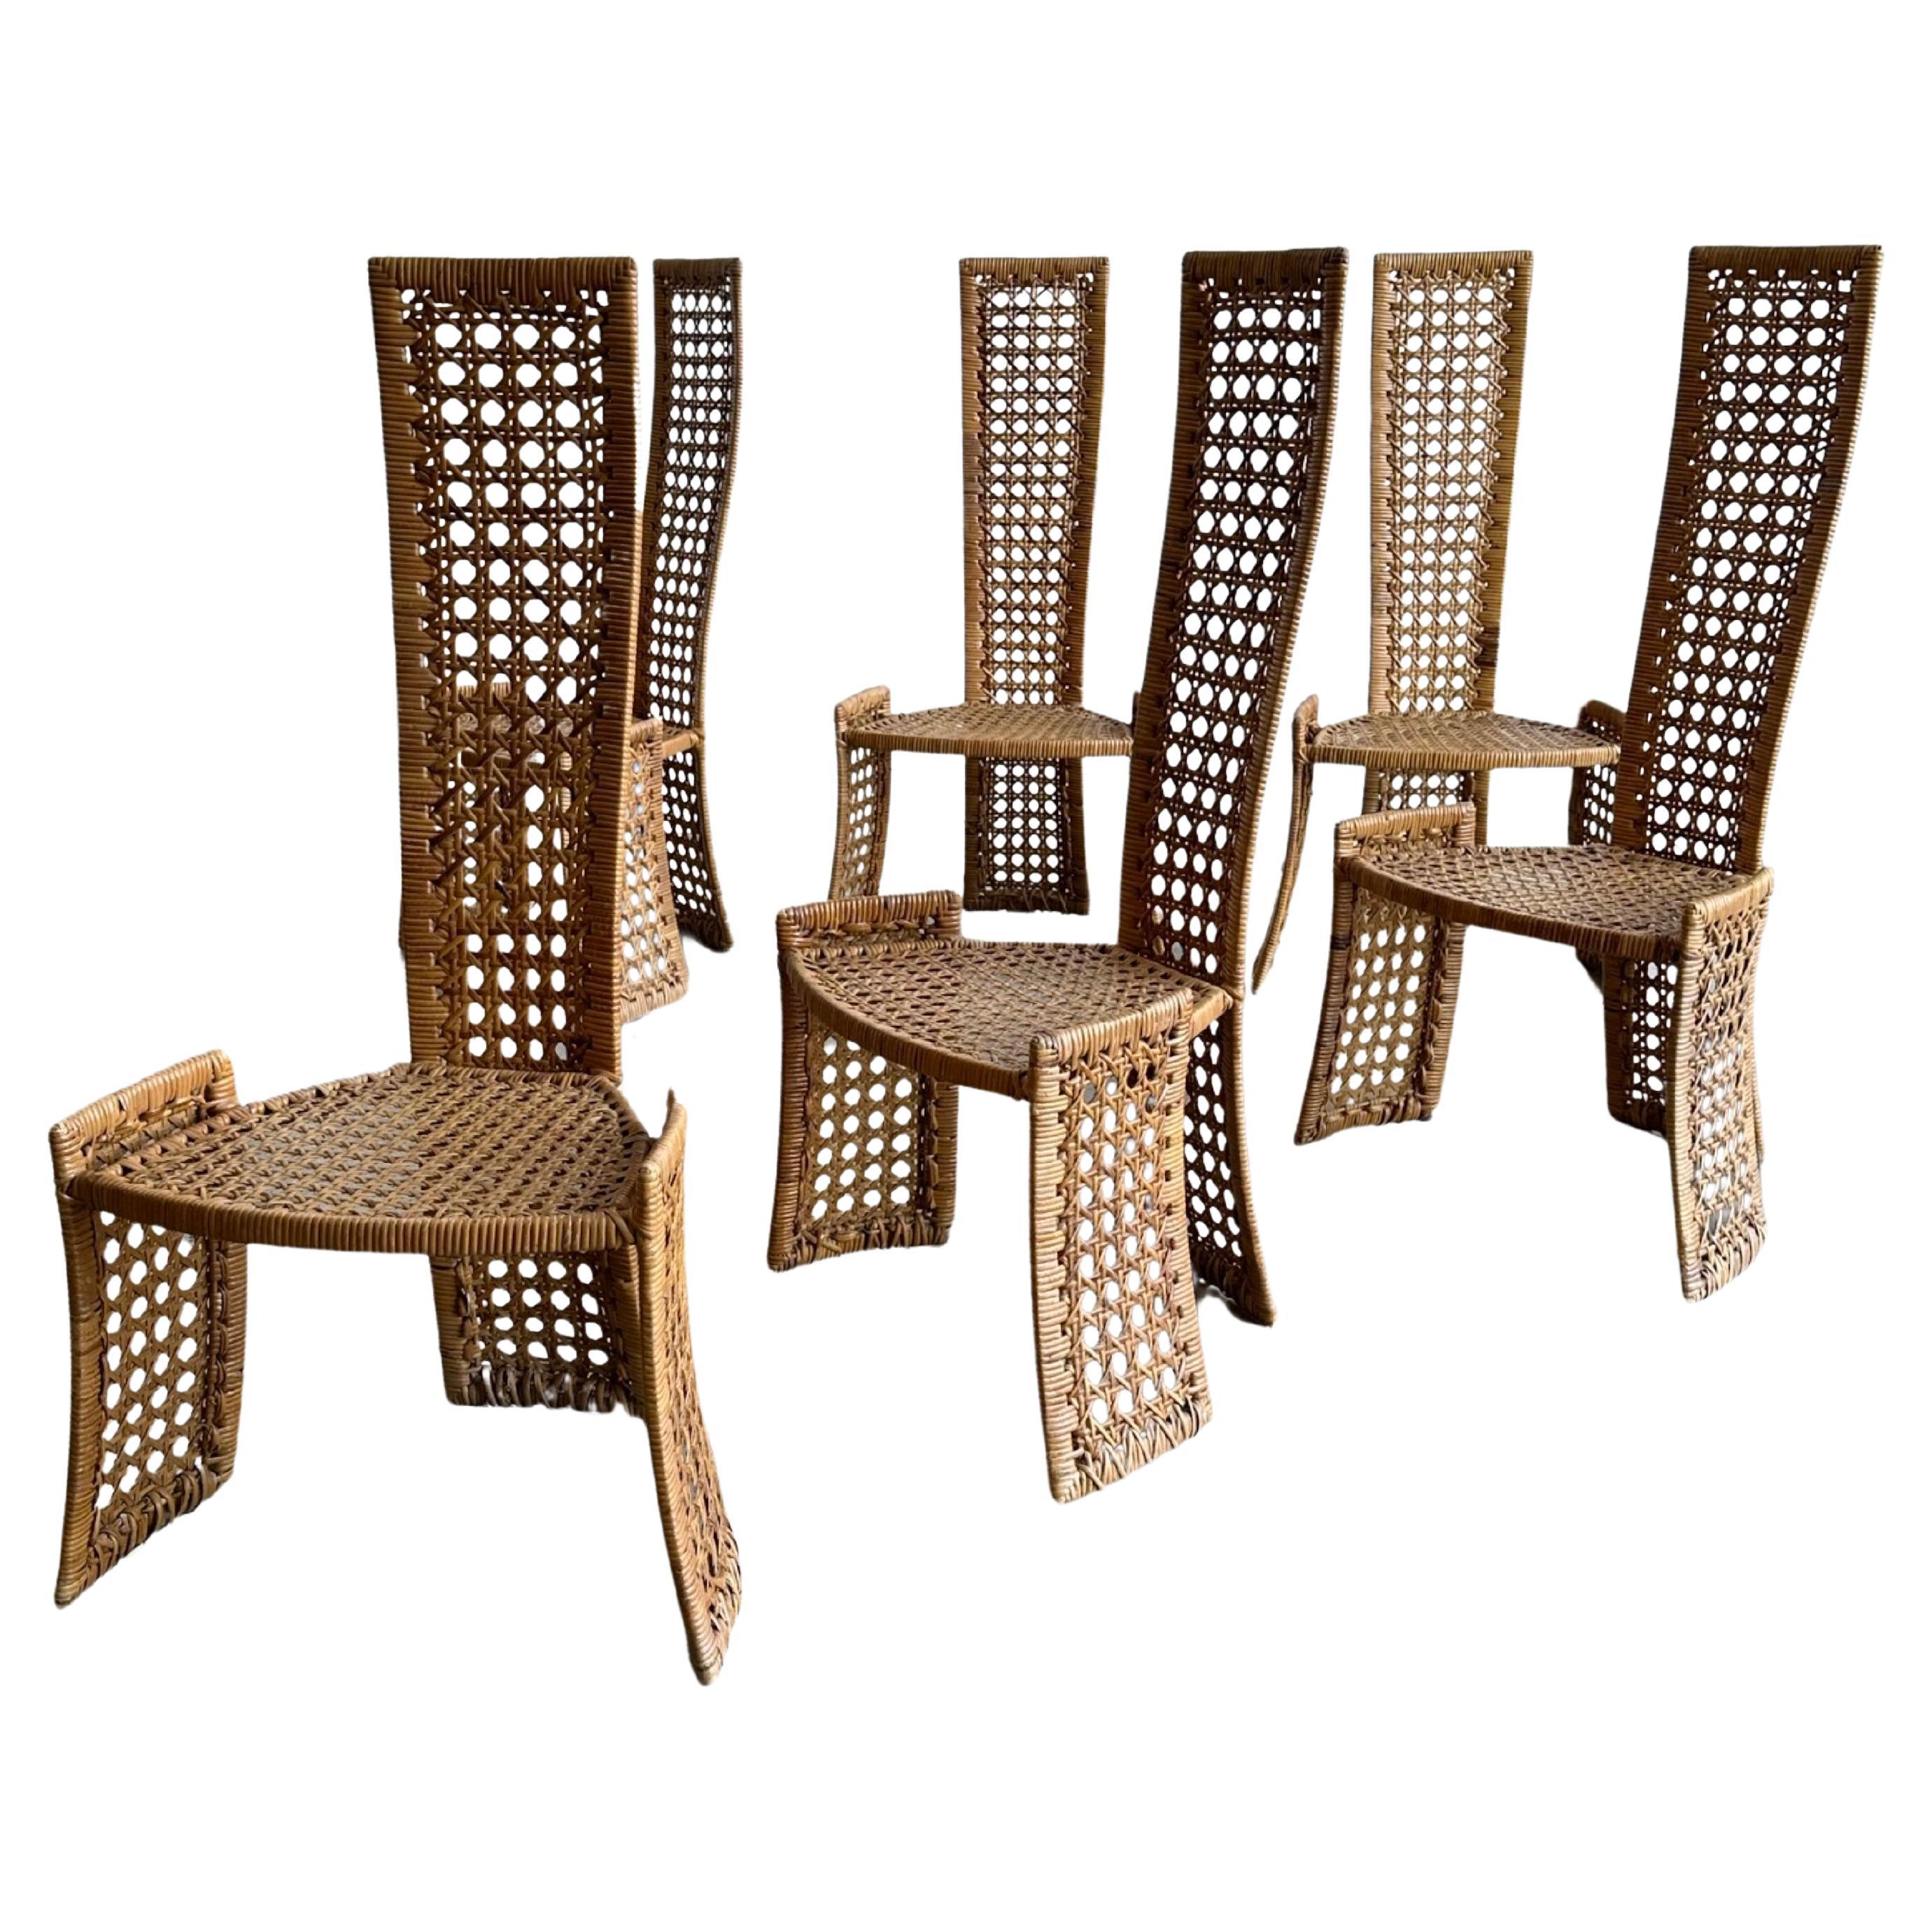 Danny Ho Fong for Tropi-cal Set of Six Rattan Chairs  For Sale